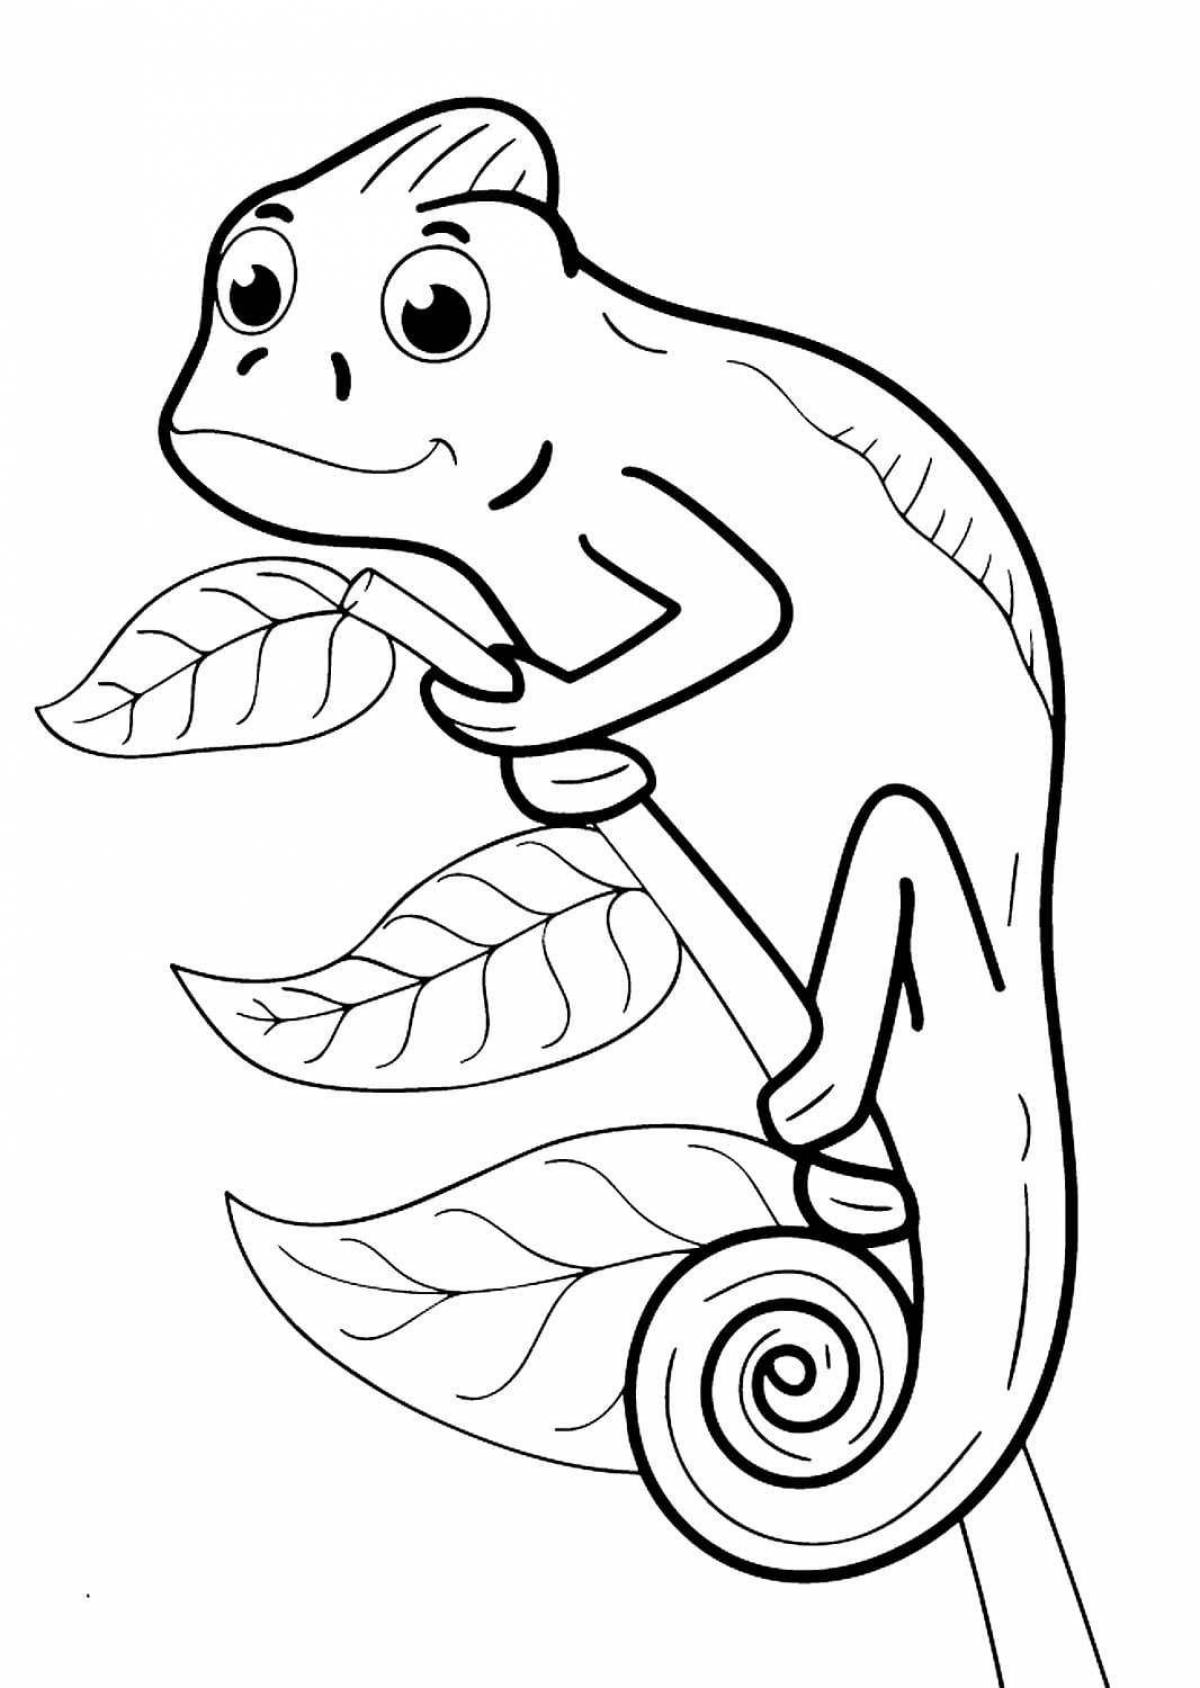 Exciting chameleon coloring book